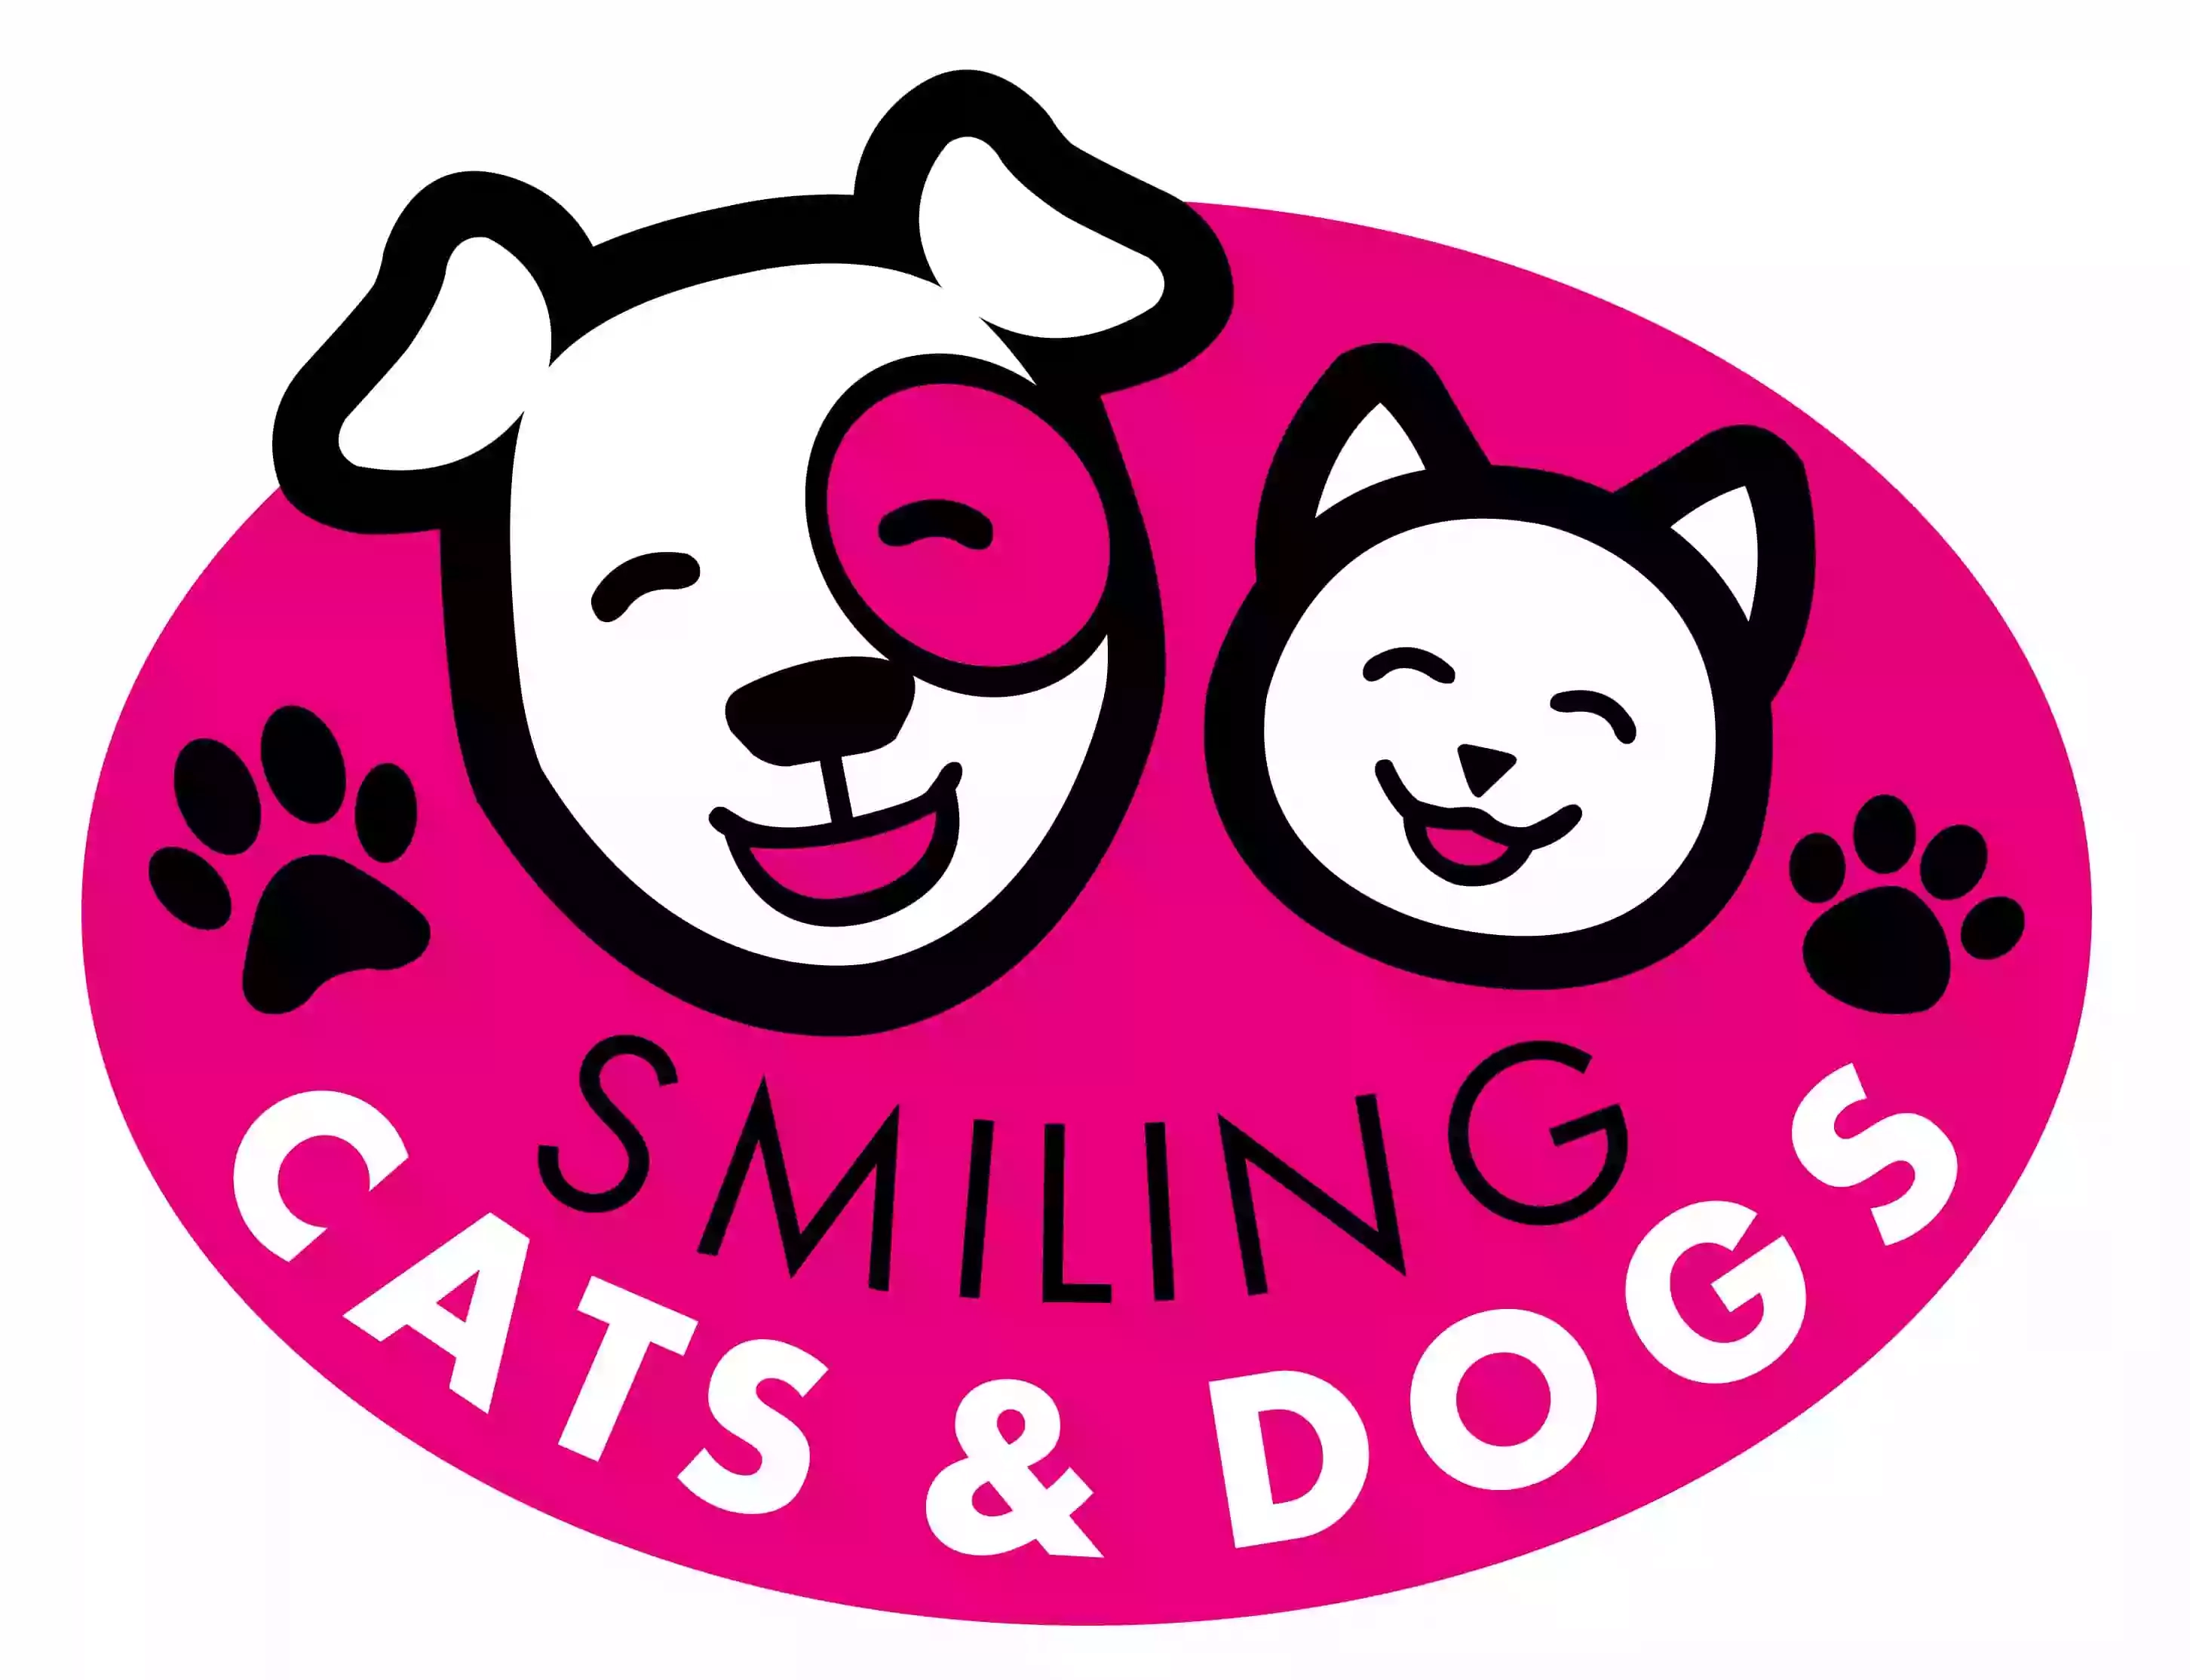 Smiling Cats and Dogs